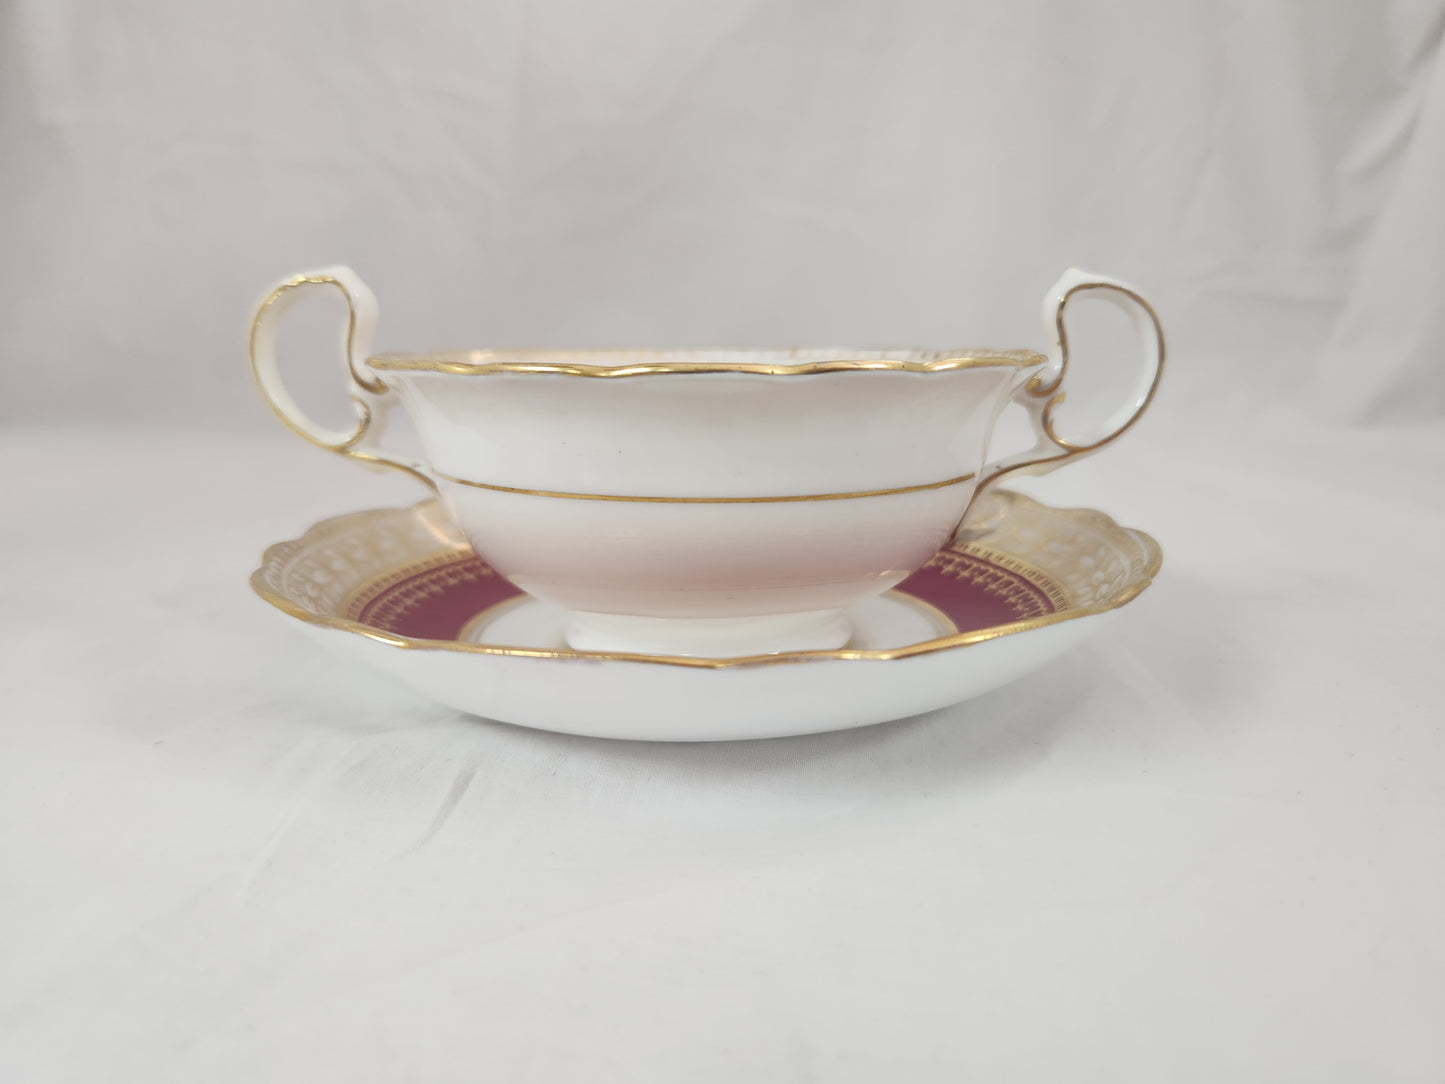 VTG - Gold Encrusted Scalloped Rim Footed Soup Bowl W/Saucer #6692 by Aynsley